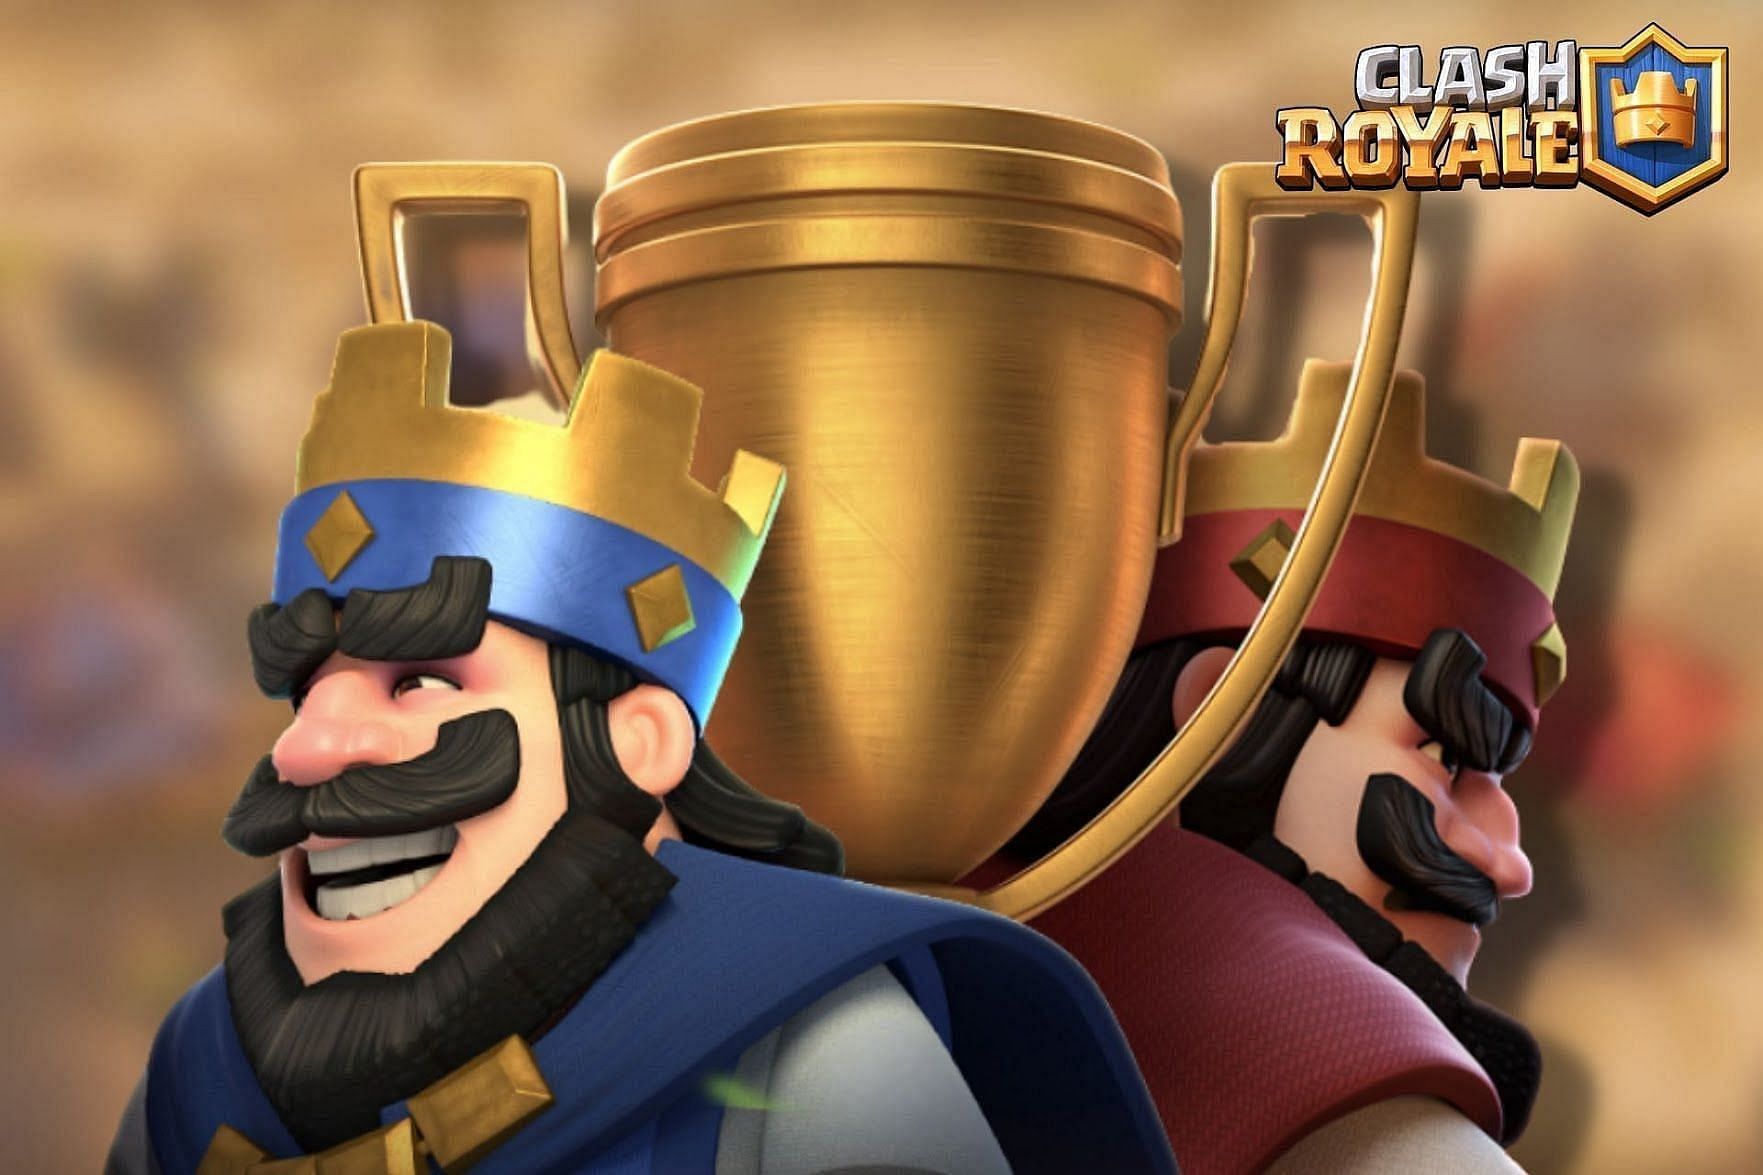 Januarys latest Community Royal Tournament in Clash Royale Information, rewards, and more